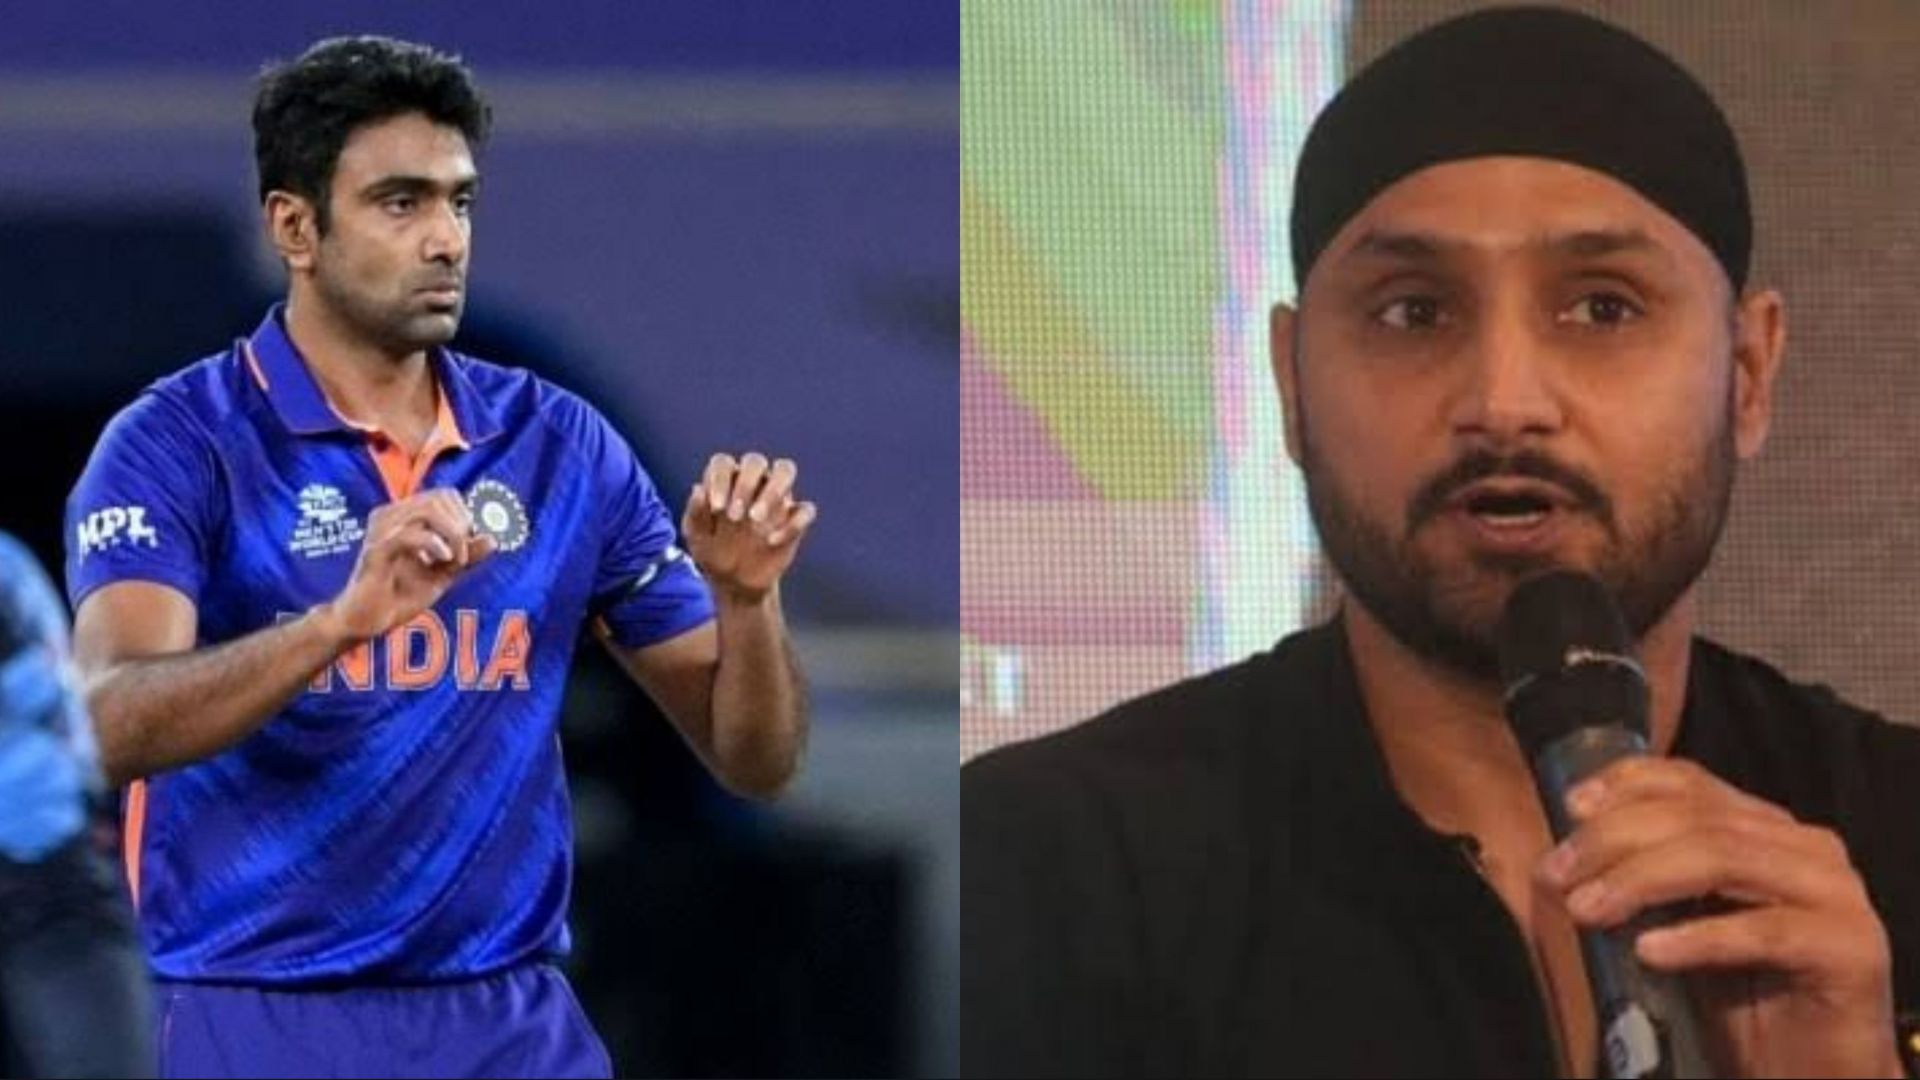 Ravichandran Ashwin (L) and Harbhajan Singh once played together for the Indian team